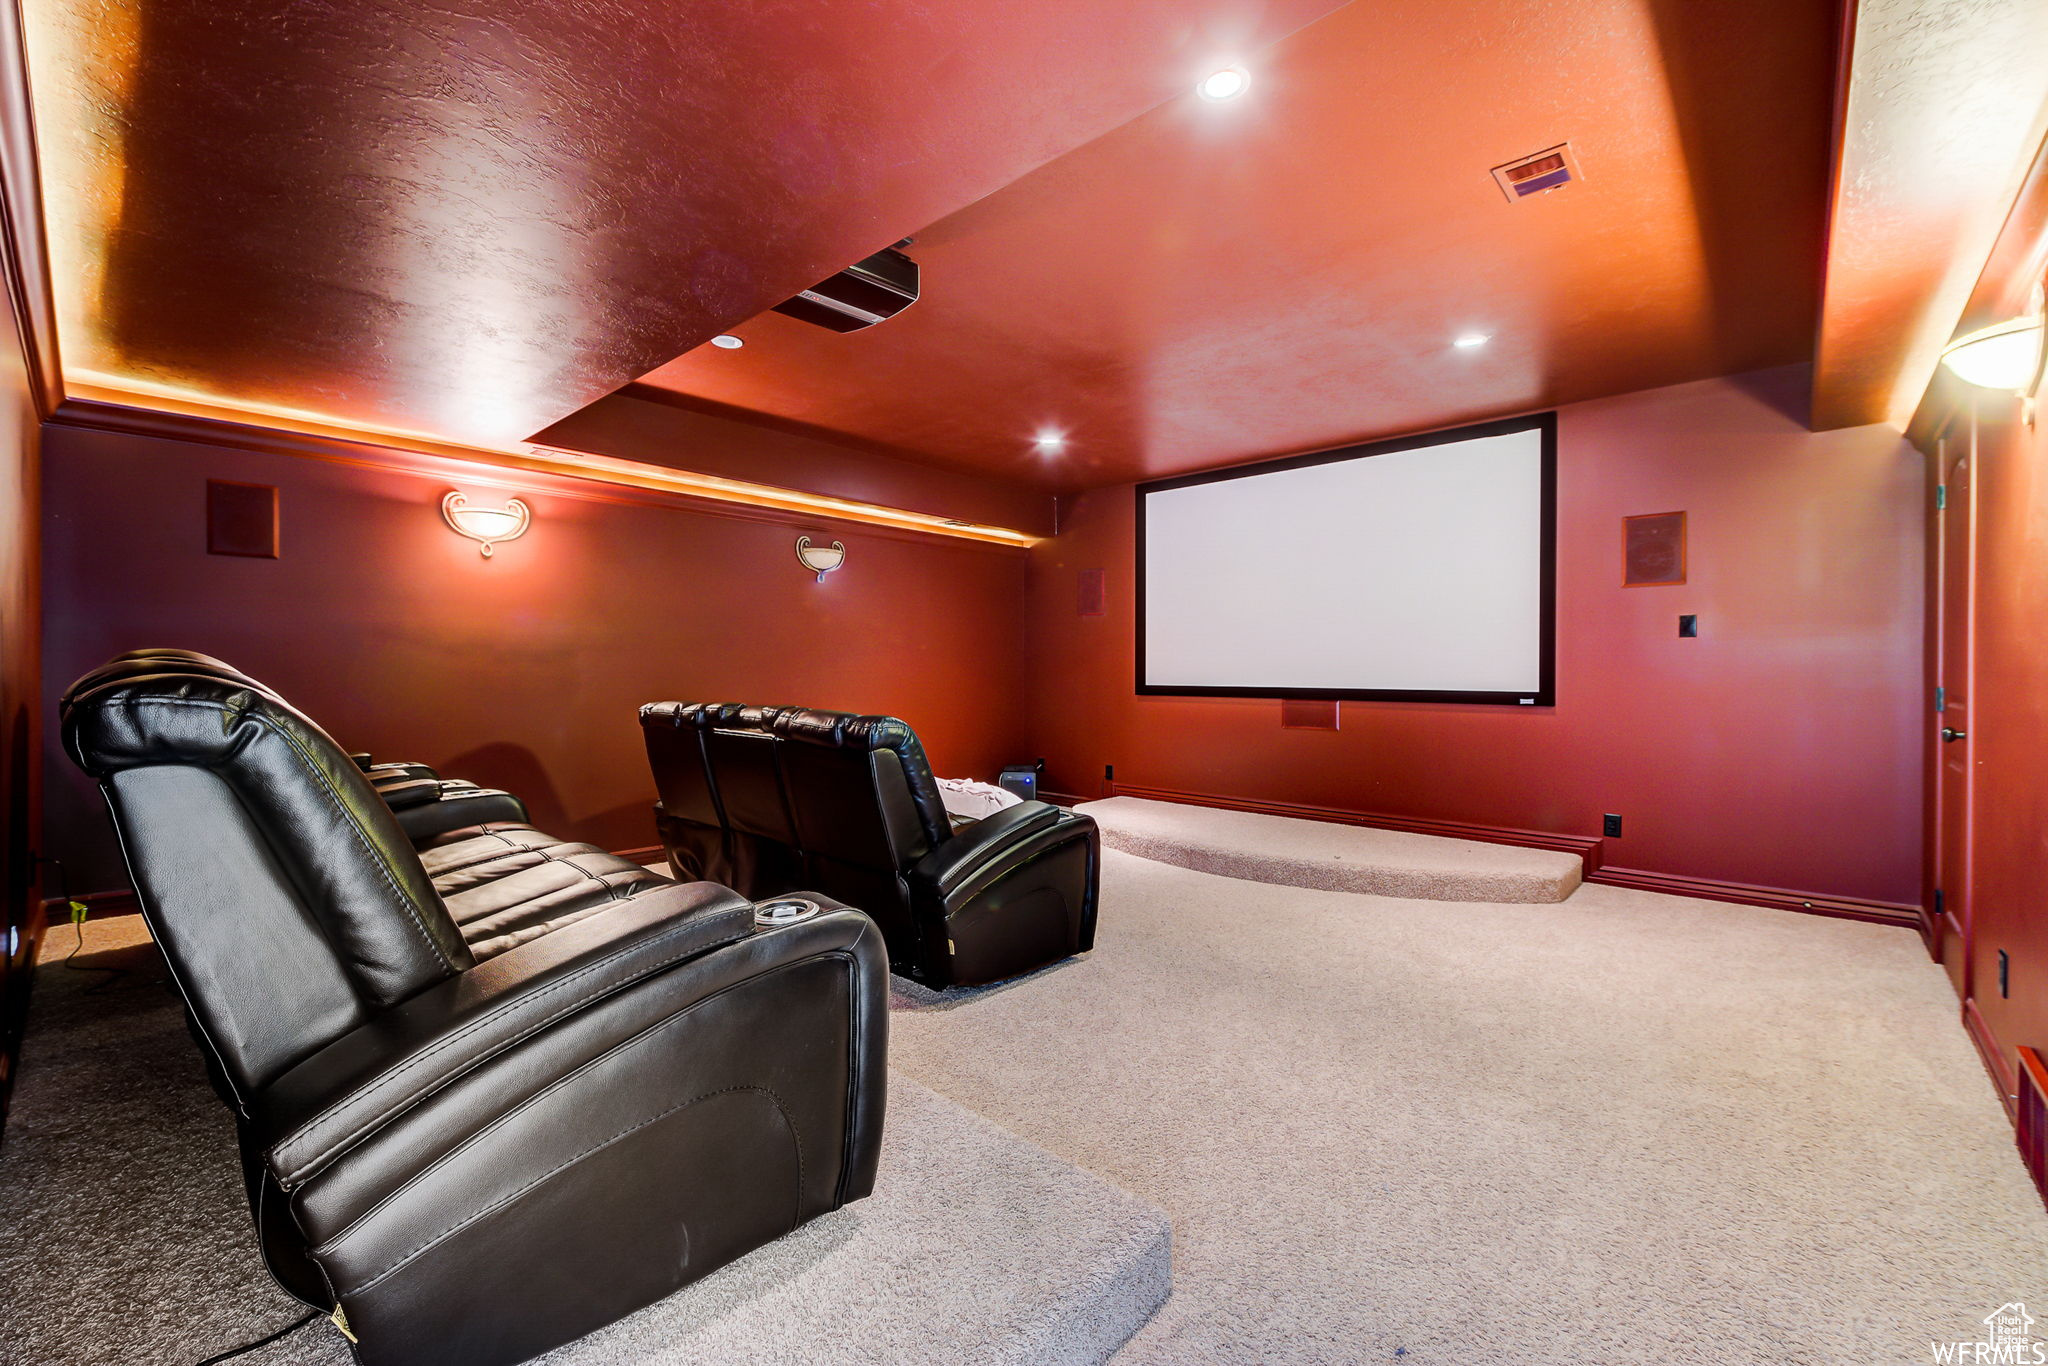 Cinema featuring light colored carpet and a tray ceiling